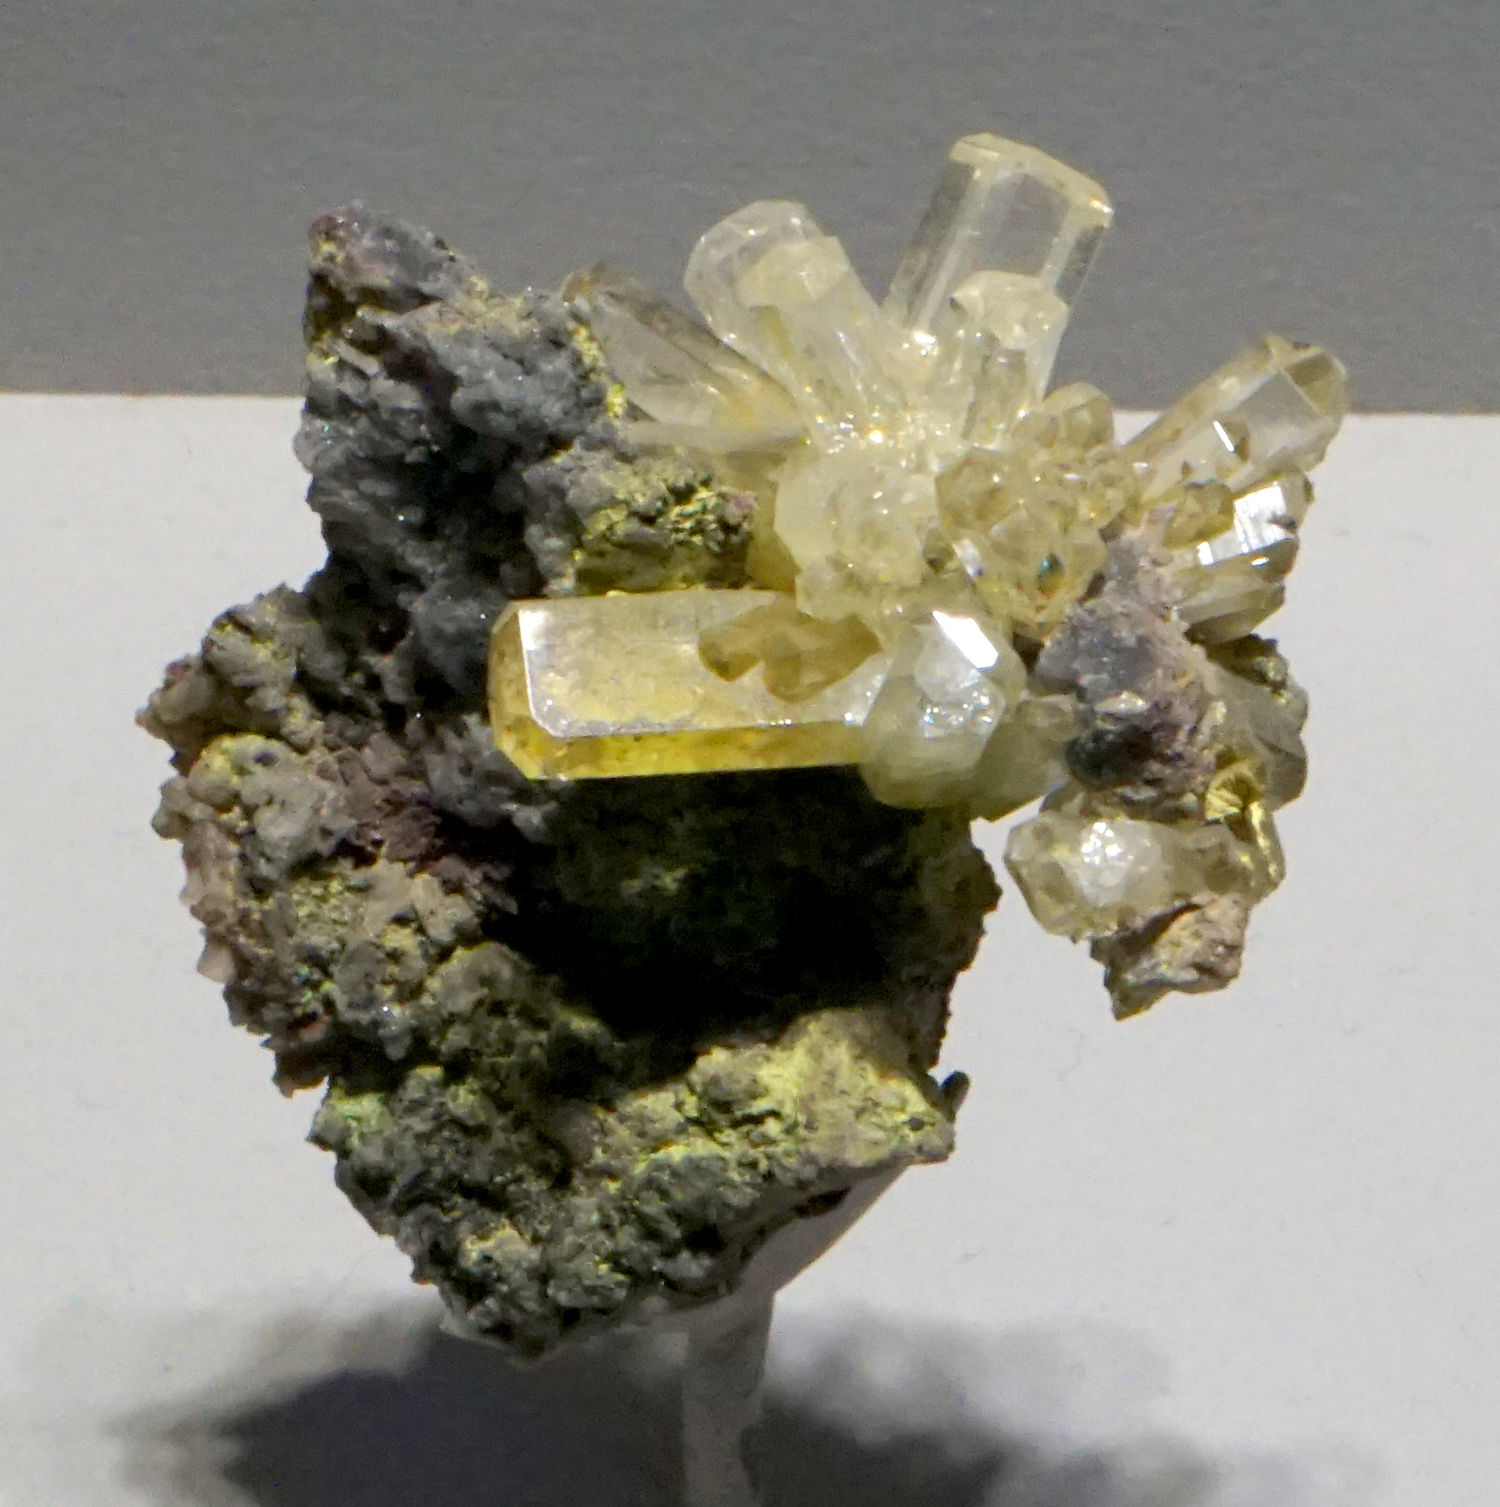 Transparent Mimetite Crystals from Tsumeb from Tsumeb, Namibia